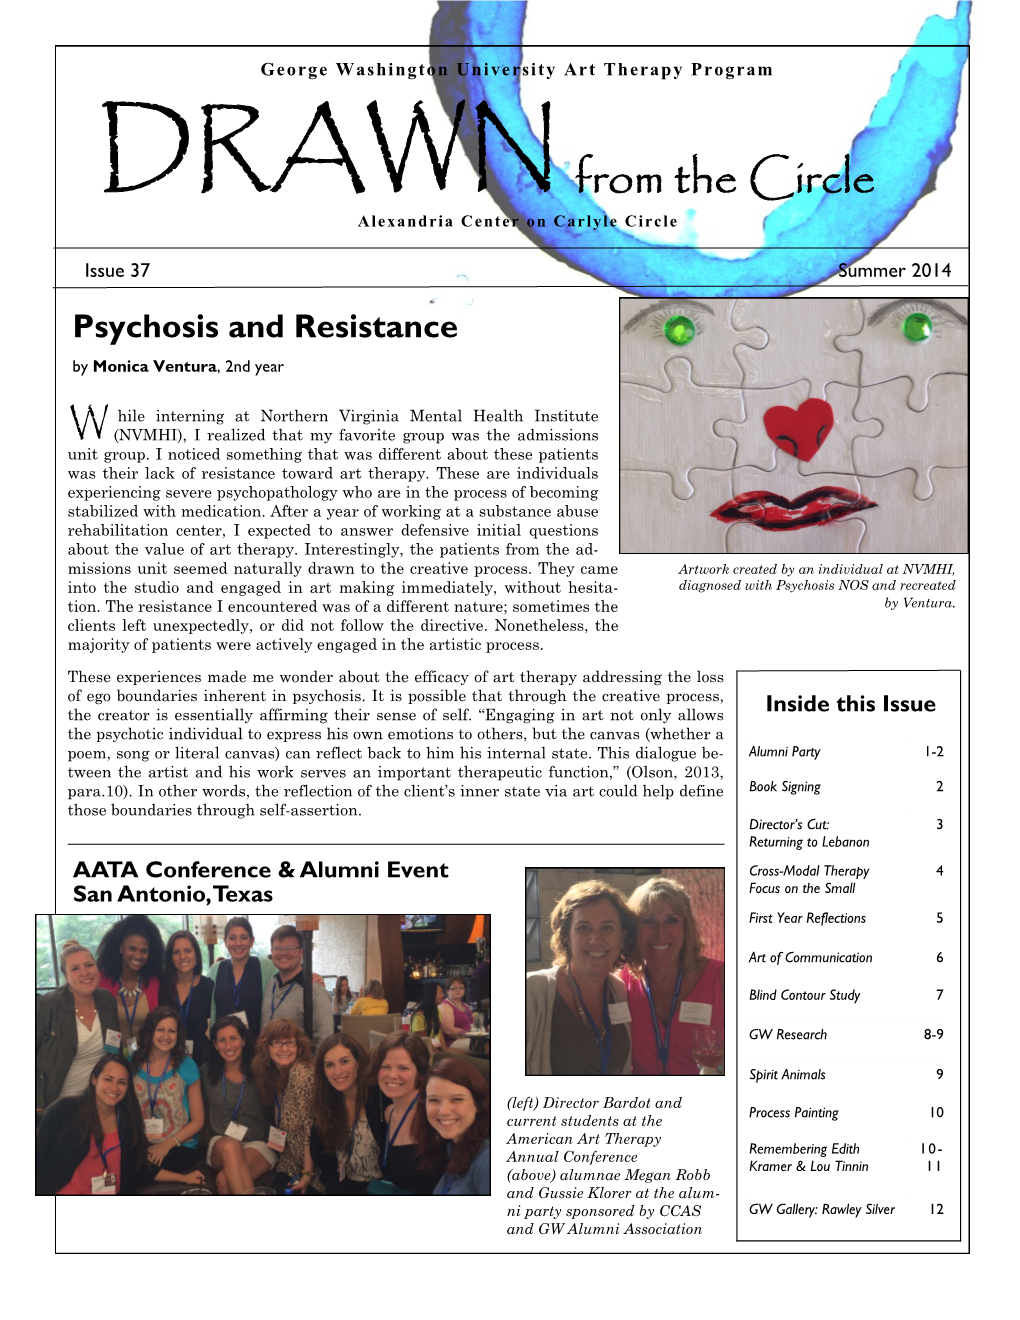 Summer 2014 Psychosis and Resistance by Monica Ventura, 2Nd Year